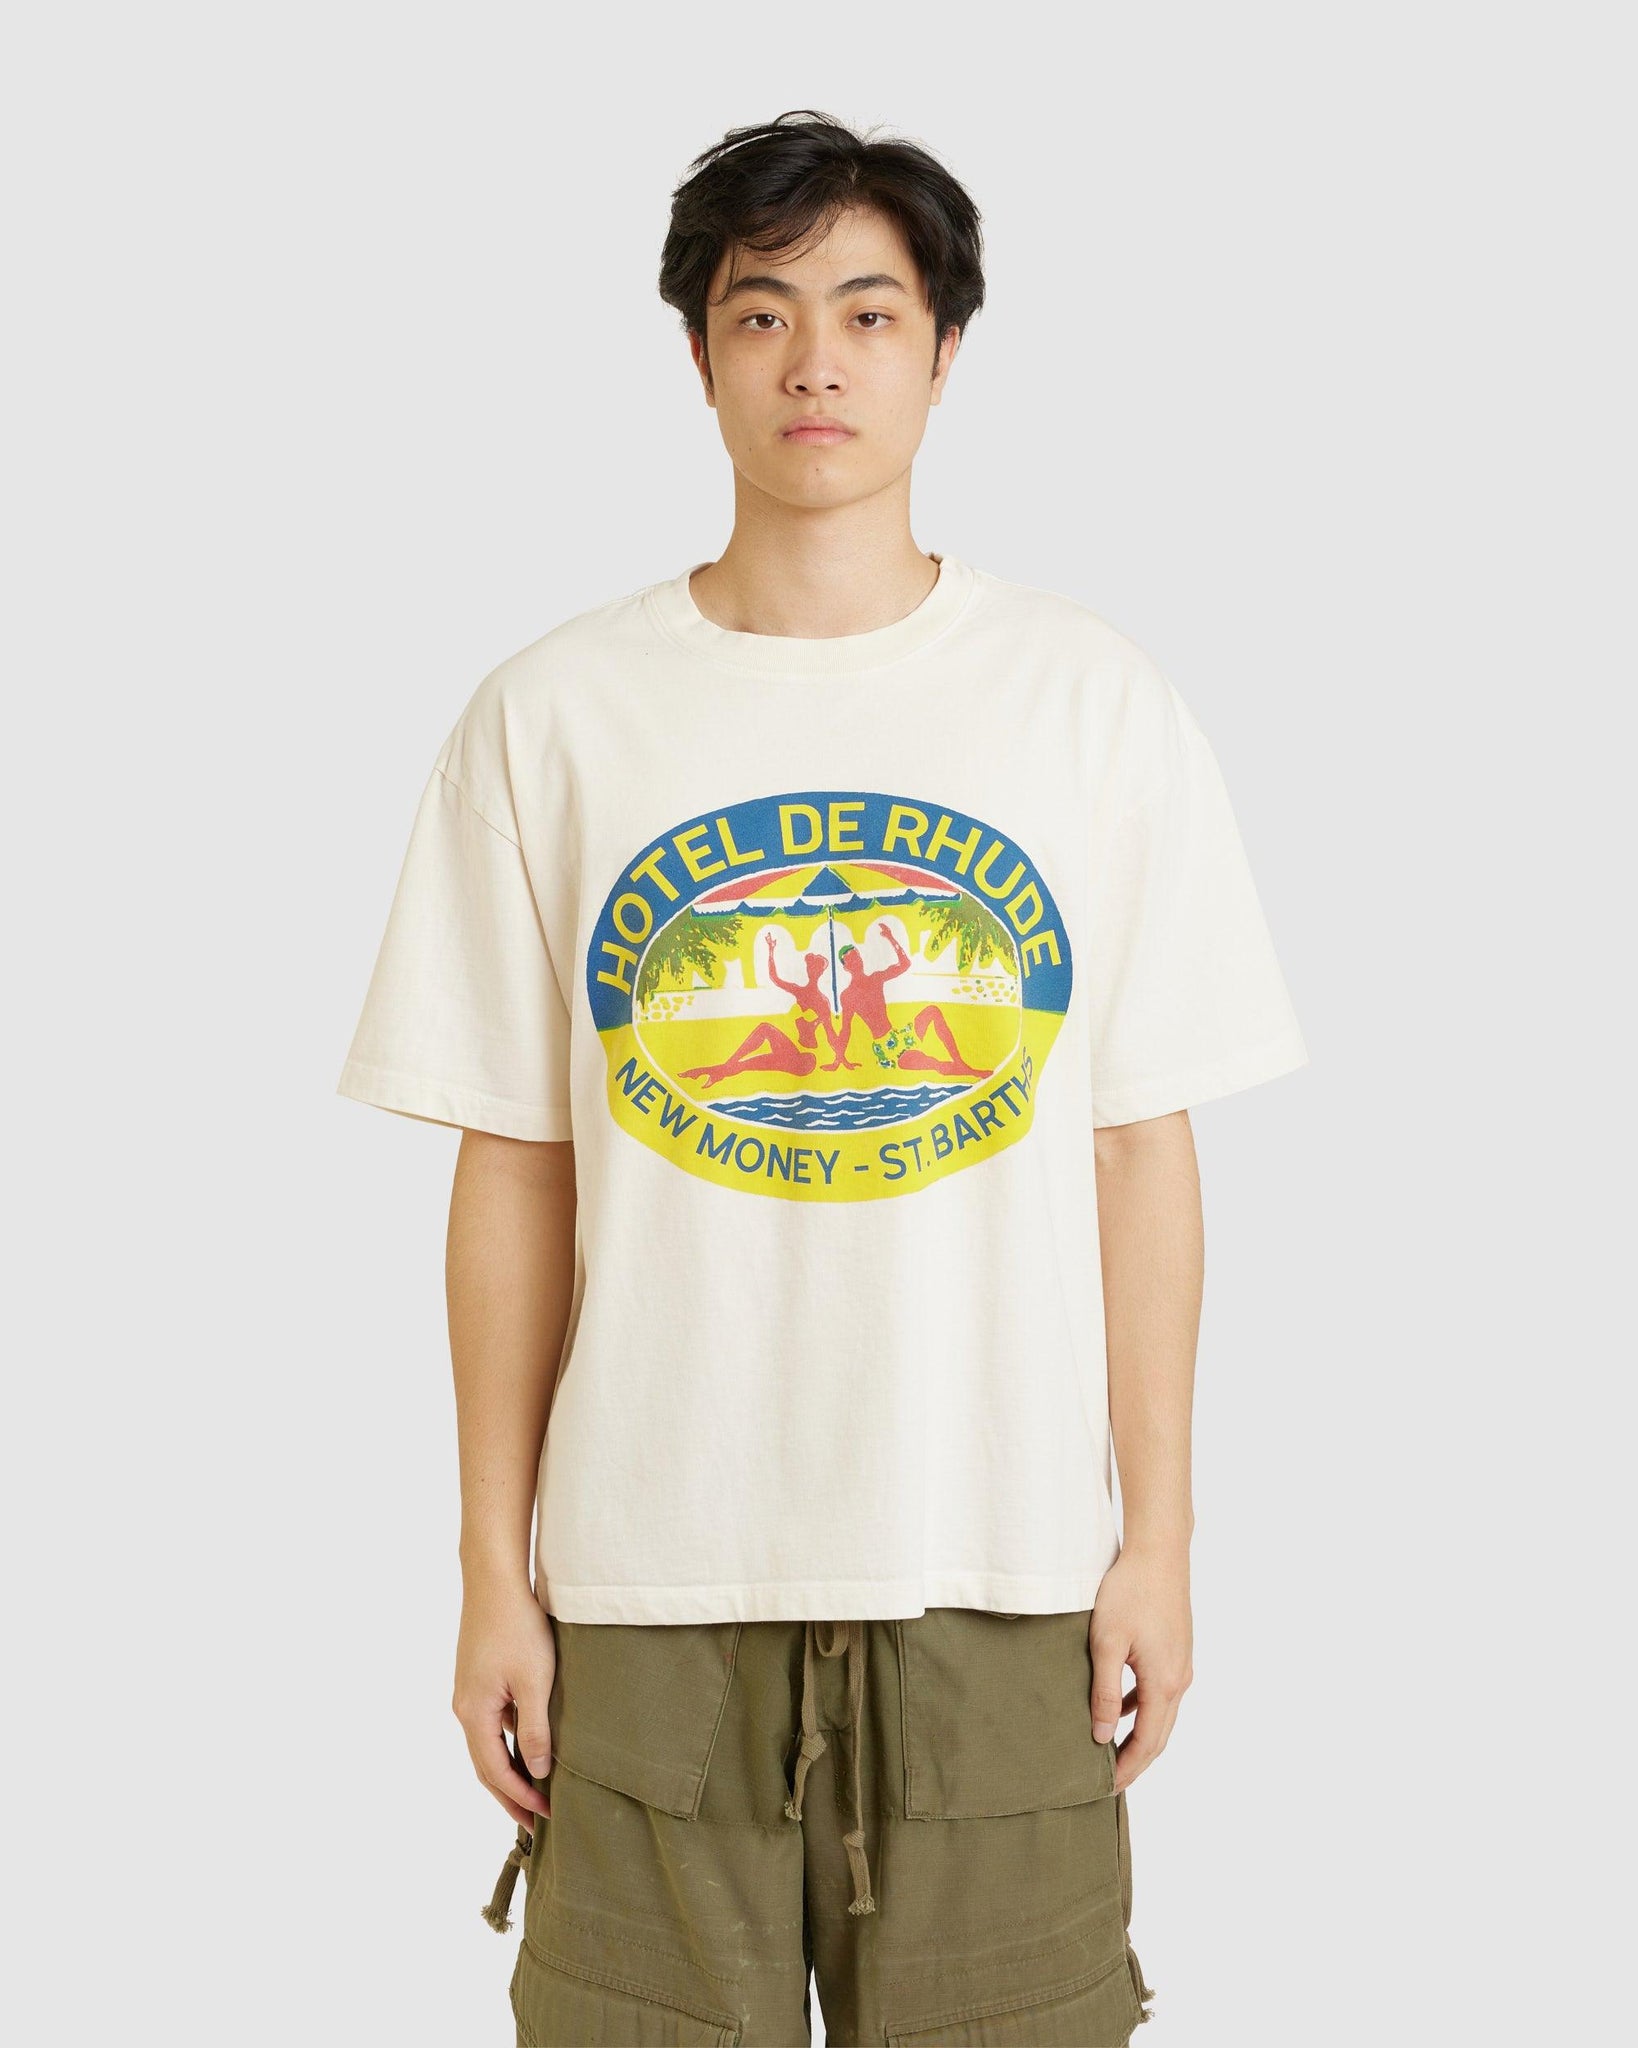 Hotel De Rhude Tee - {{ collection.title }} - Chinatown Country Club 